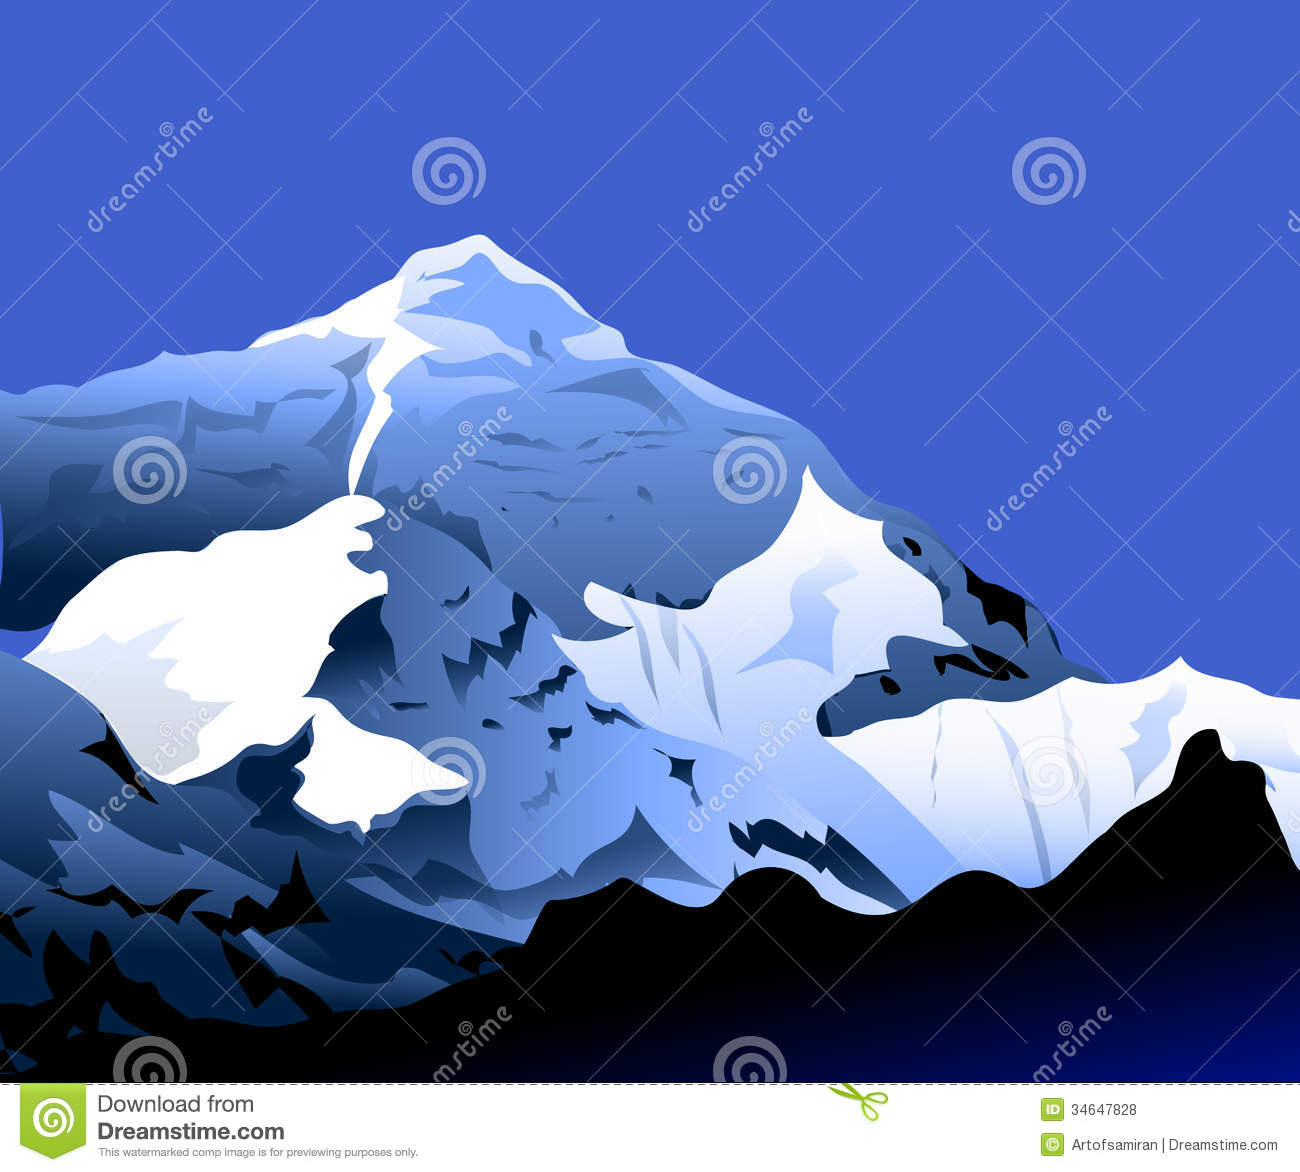 Mount Everest clipart #15, Download drawings